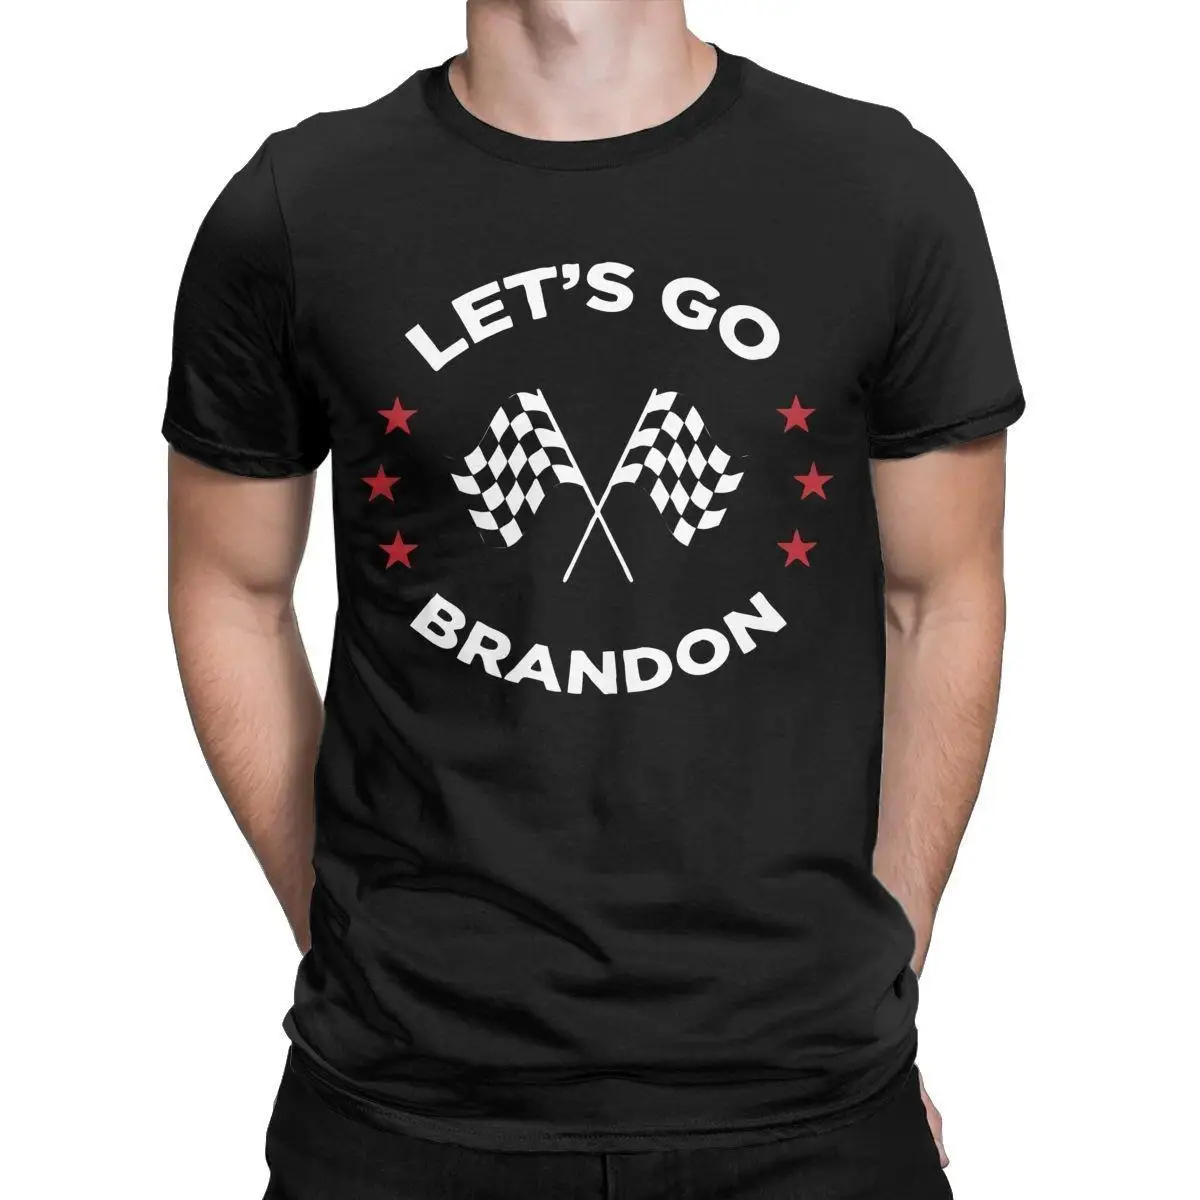 Let's Go Brandon Racing Flag T Shirts for Men 100% Cotton Humor T-Shirts Crew Neck Tees Short Sleeve Tops New Arrival